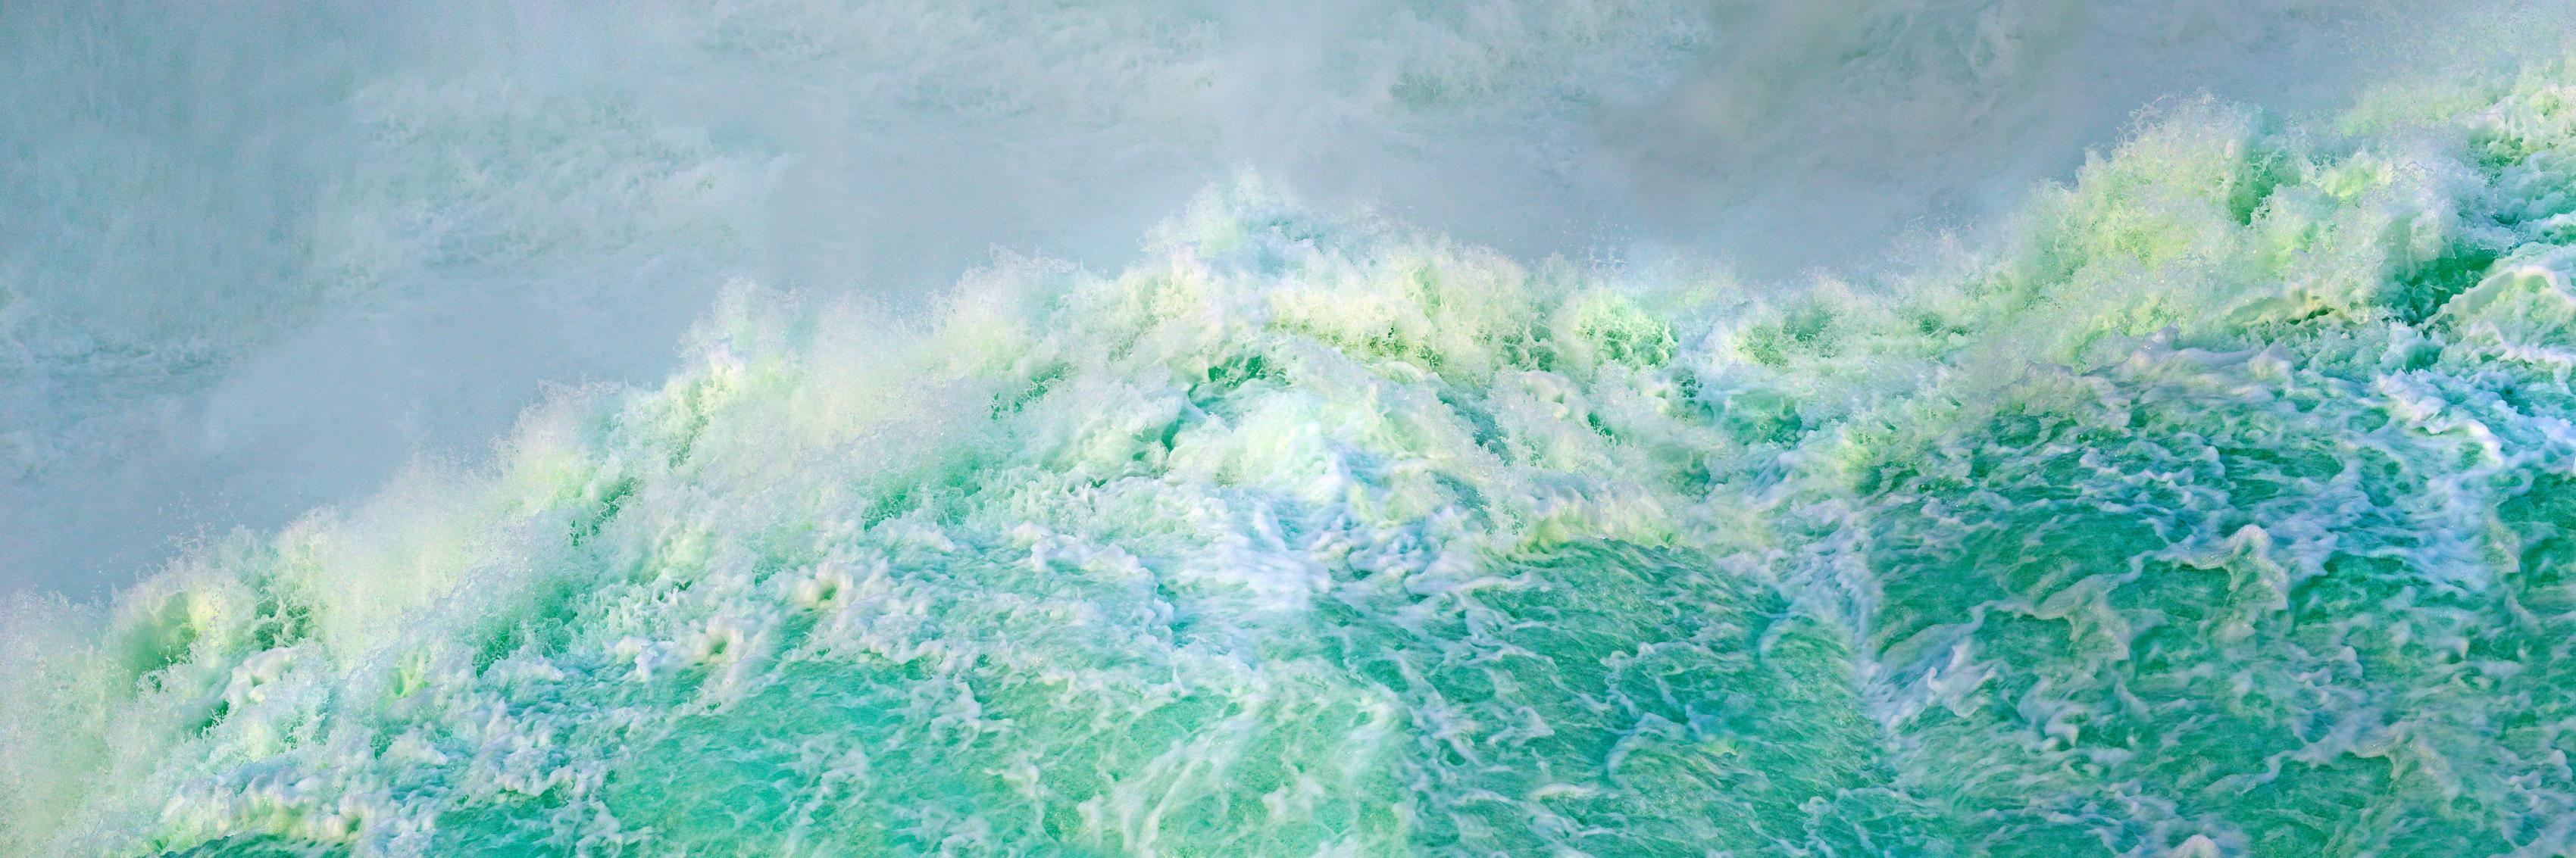 Invisible Scape – Jun Ahn, Water, Wave, Summer, Blue, Ocean, Color Photography